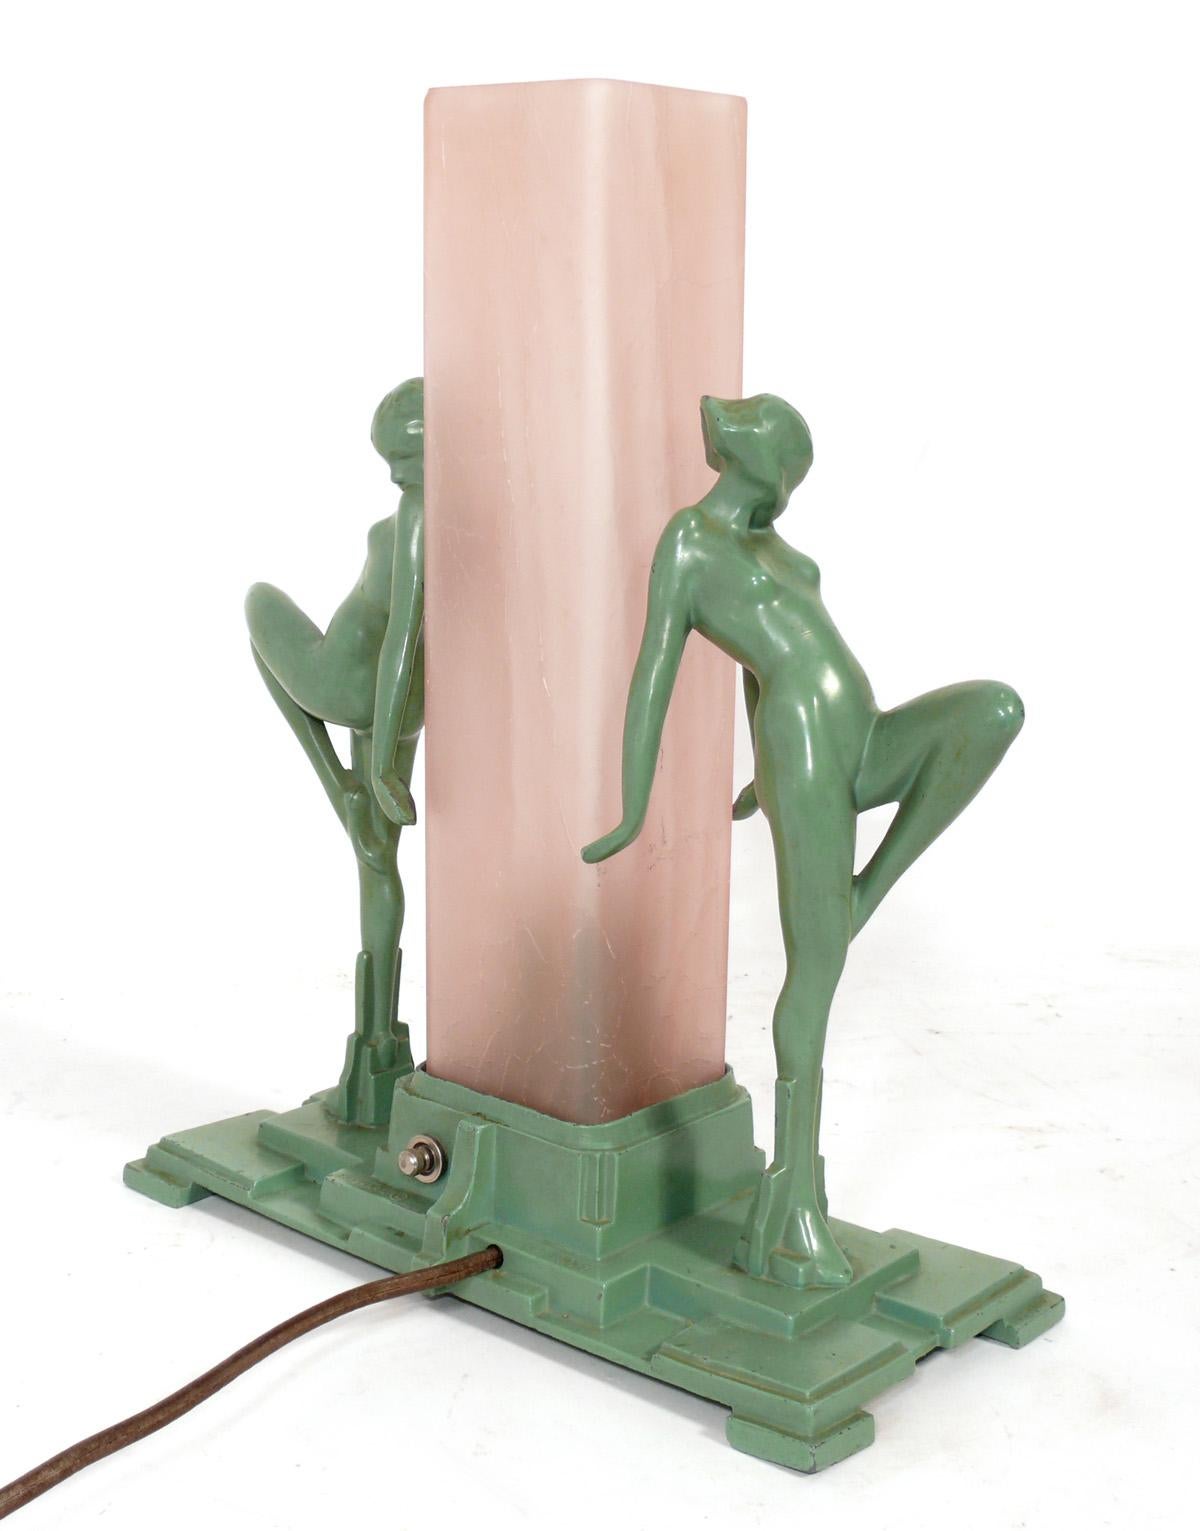 Frankart Original Art Deco Model L222 lamp, American, circa 1930s. Original Frankart figural lamp depicting two young female nude dancing beauties with knees bent and raised and arms pulled back holding a squared rose pink crackled glass shade that